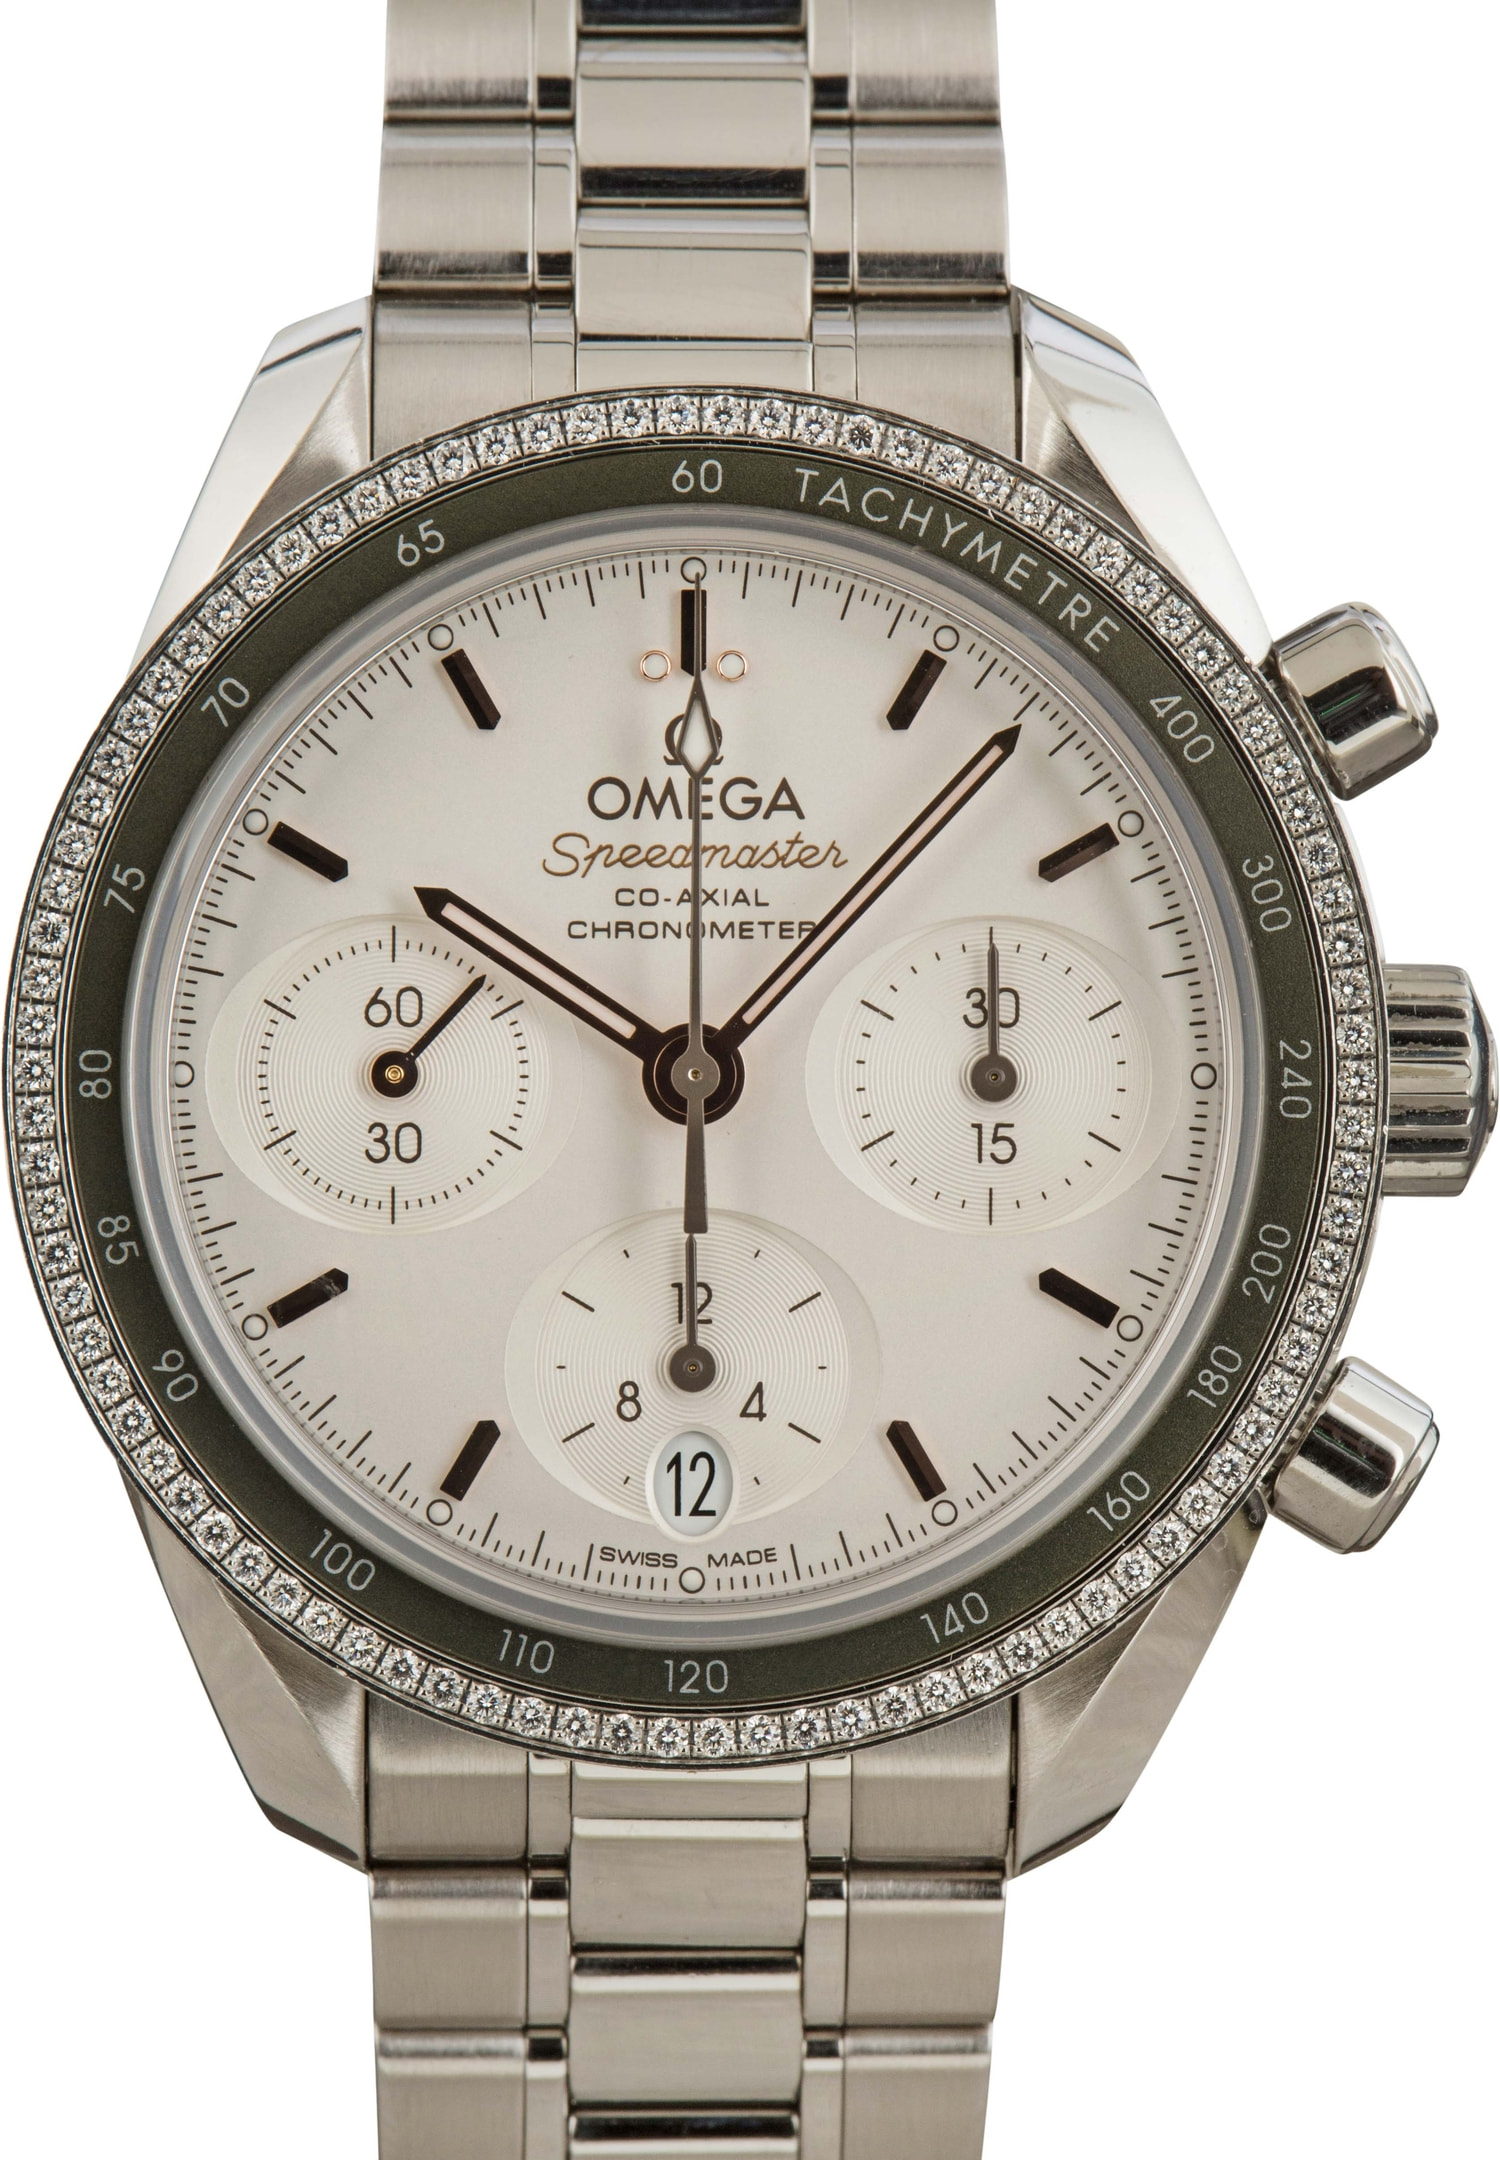 Omega Silver Watch - BobsWatches.com